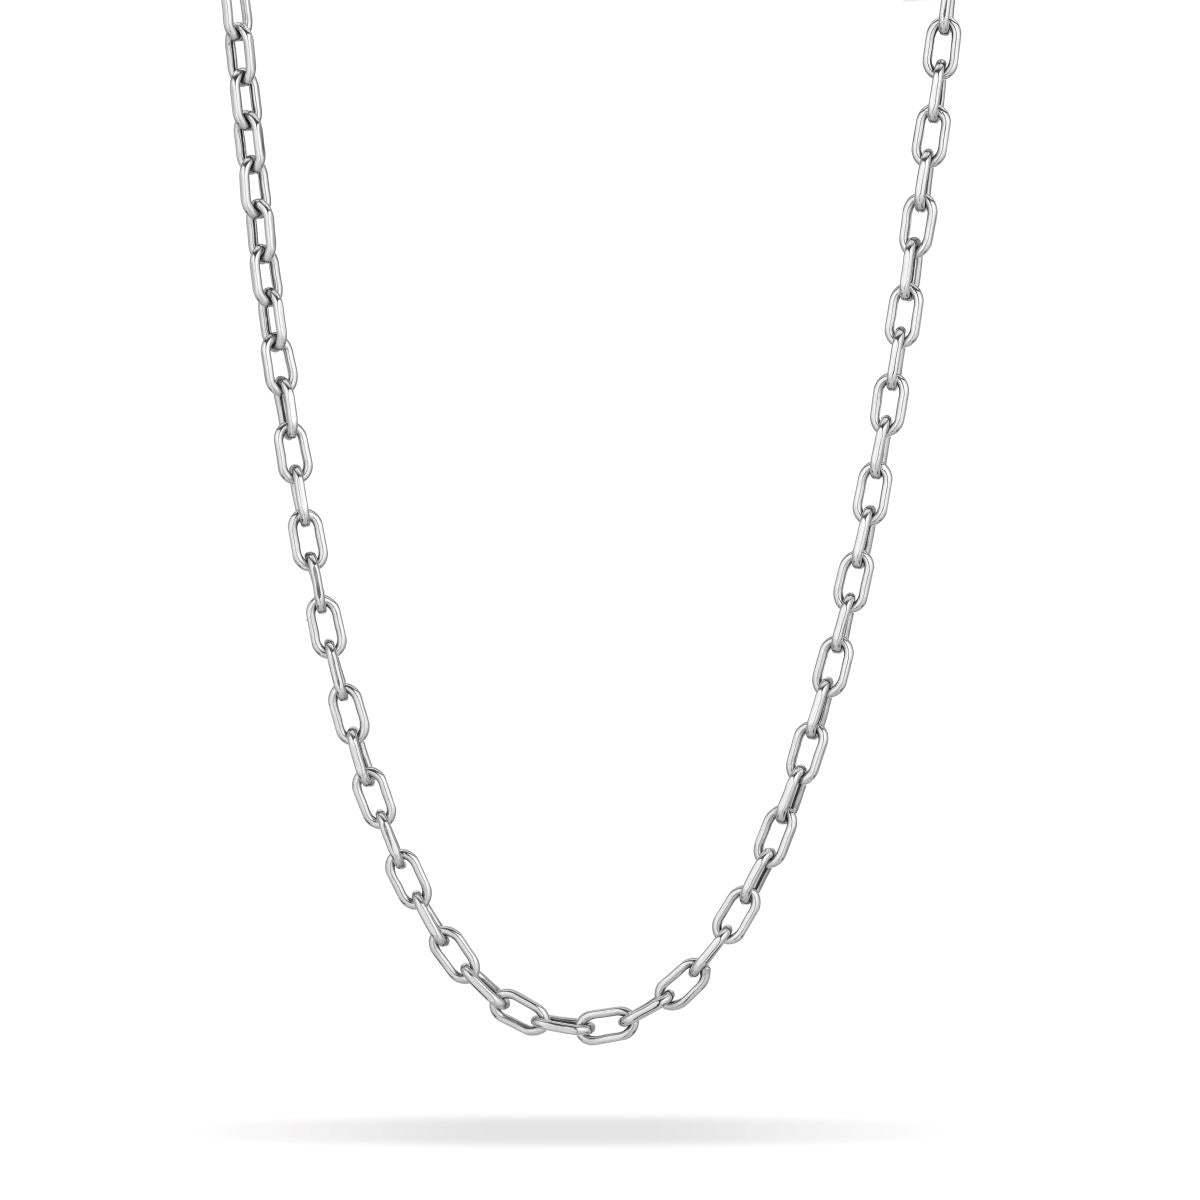 4mm Italian Chain Link Necklace in Sterling Silver